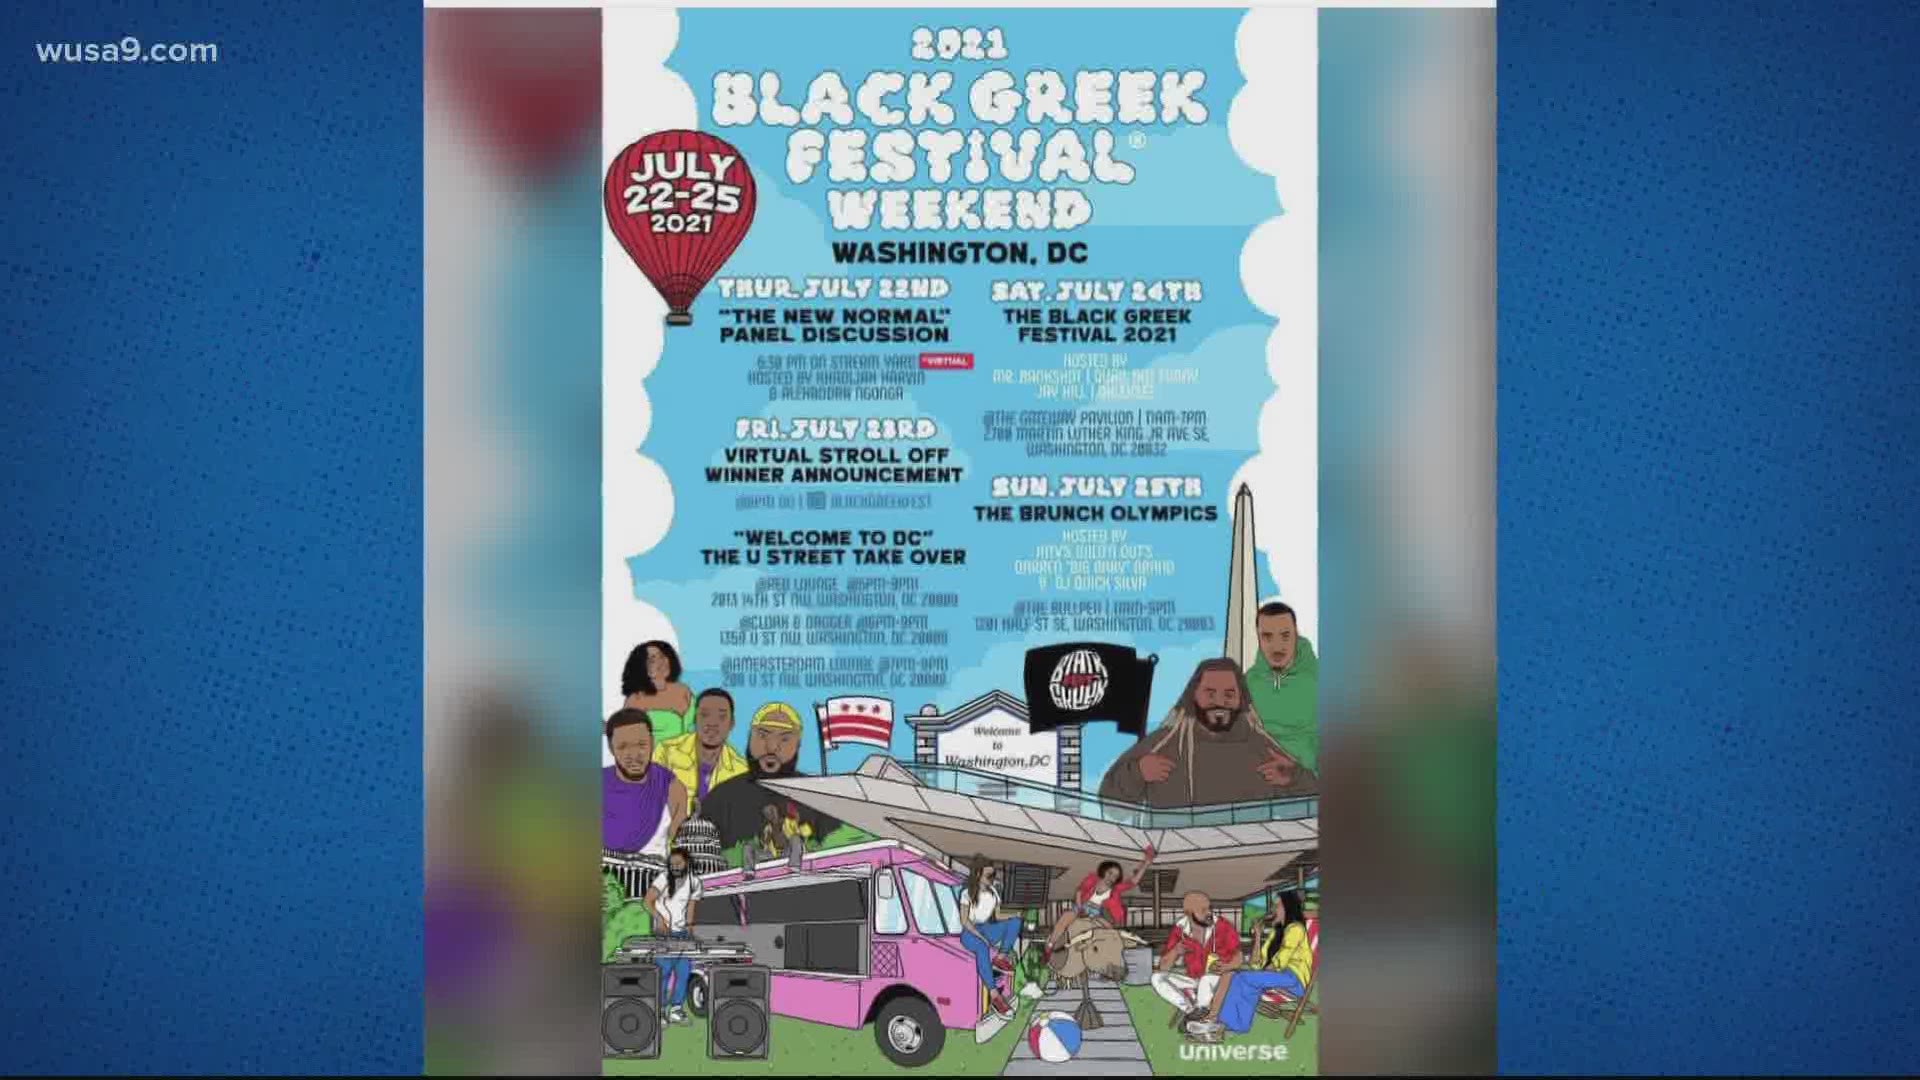 The Inaugural Black Greek Festival is bringing greek life and culture to the DMV from July 22-25.